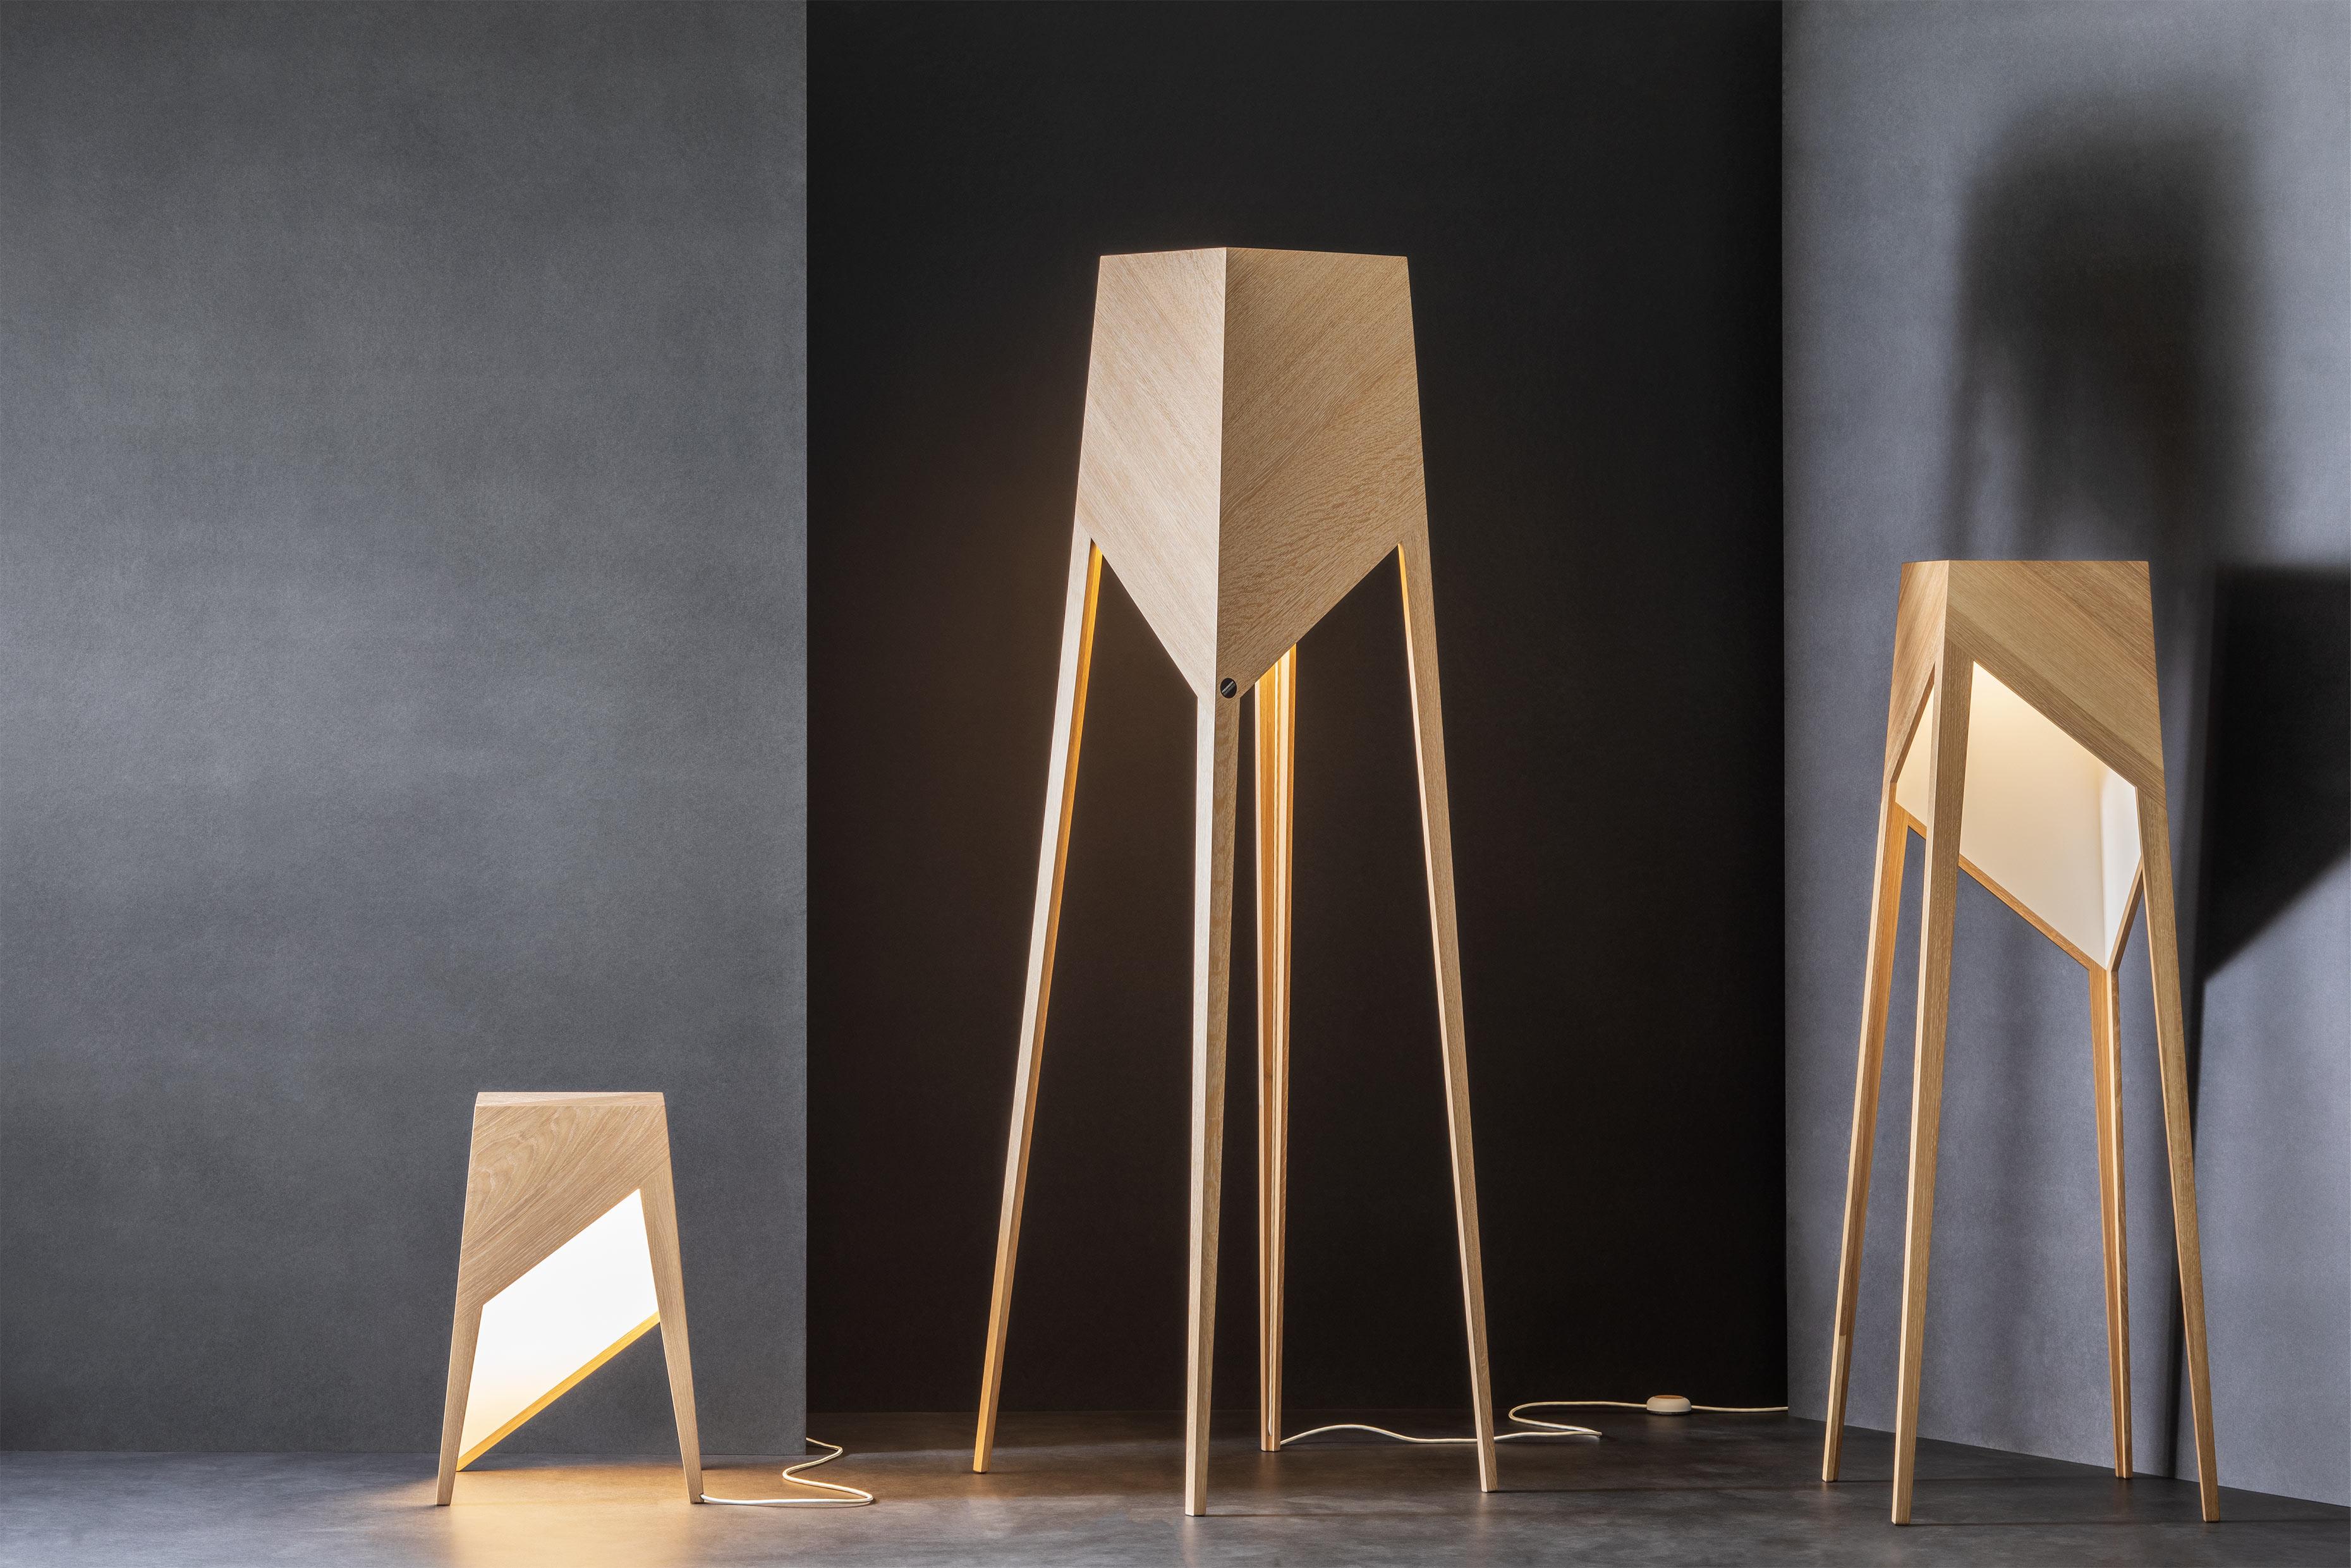 Set of 3 Luise floor lamp by Matthias Scherzinger
Dimensions: L 185 x 55 cm
 M 140 x 48 cm
 S 58 x 39 cm
Materials: oak: white lyed, oil

All our lamps can be wired according to each country. If sold to the USA it will be wired for the USA for